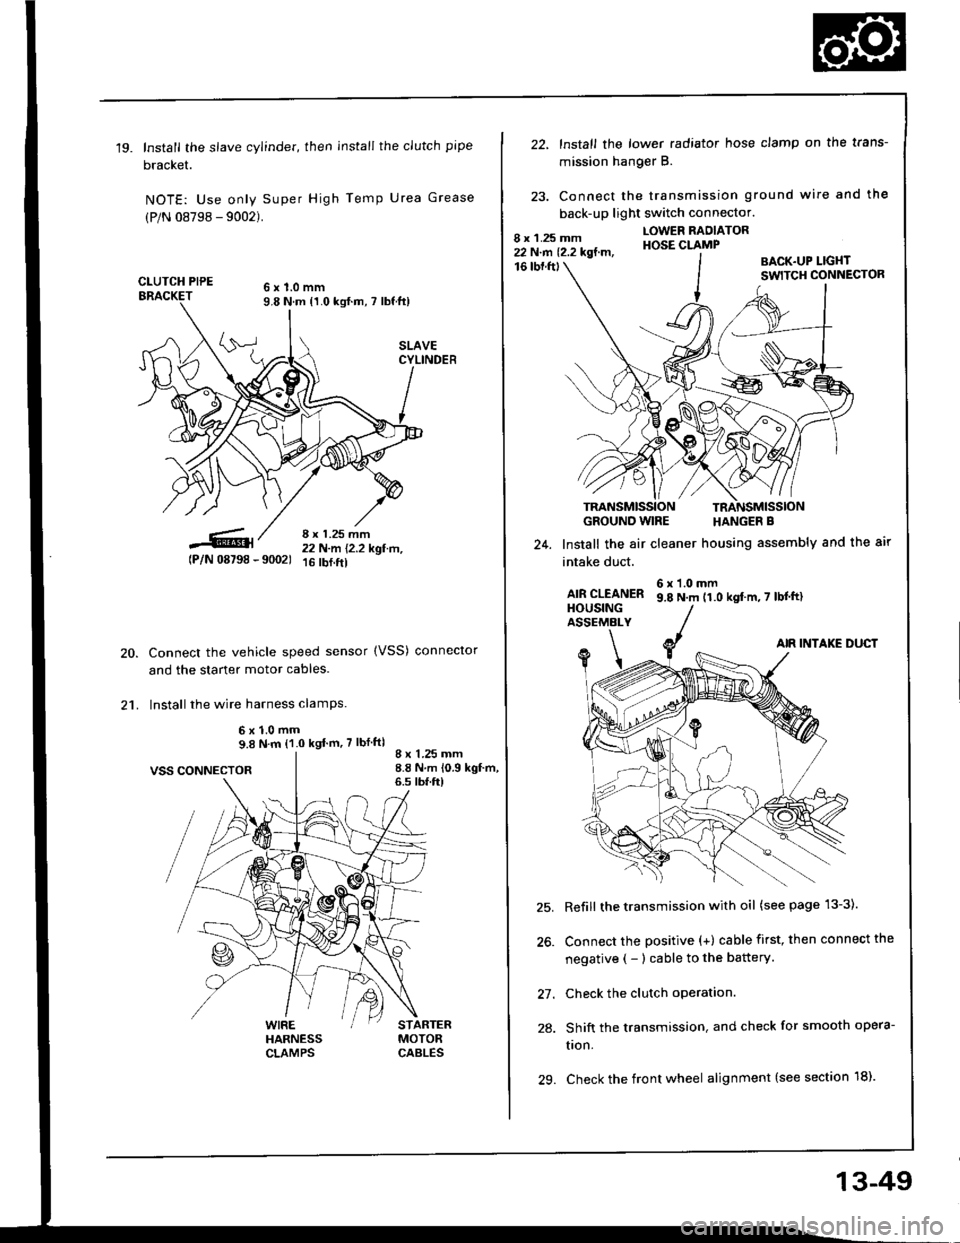 HONDA INTEGRA 1994 4.G Workshop Manual 19.Install the slave cylinder, then install the clutch pipe
bracket.
NOTE: Use only Super High Temp Urea Grease
(P/N 08798 - 9002).
CLUTCH PIPE6x1.0mm9.8 N.m {1.0 kgf.m, 7 lbf ft)
8 x 1.25 mm22 N-m 1